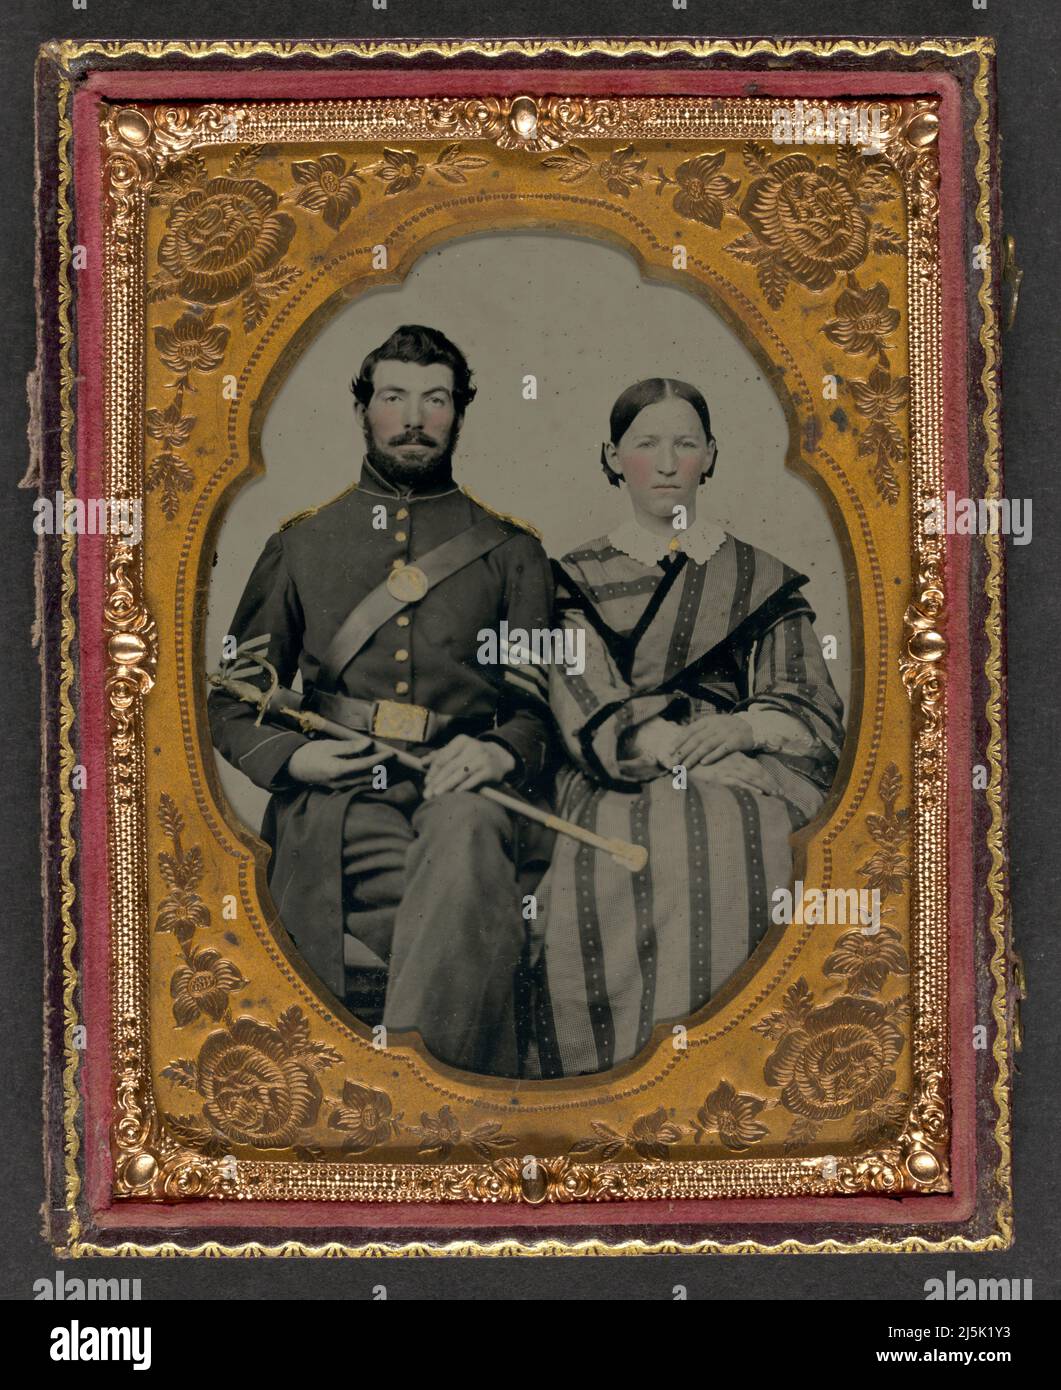 Unidentified soldier in Union sergeant's uniform with Model 1840 non-commissioned officer's sword next to unidentified woman Created / Published between 1861 and 1865  Subject Headings     -  United States.--Army--People--1860-1870      -  Soldiers--Union--1860-1870      -  Military uniforms--Union--1860-1870      -  Women--1860-1870      -  Couples--1860-1870      -  Daggers & swords--1860-1870      -  United States--History--Civil War, 1861-1865--Military personnel--Union  Headings     Ambrotypes--Hand-colored--1860-1870.      Group portraits--1860-1870.      Portrait photographs--1860-1870. Stock Photo